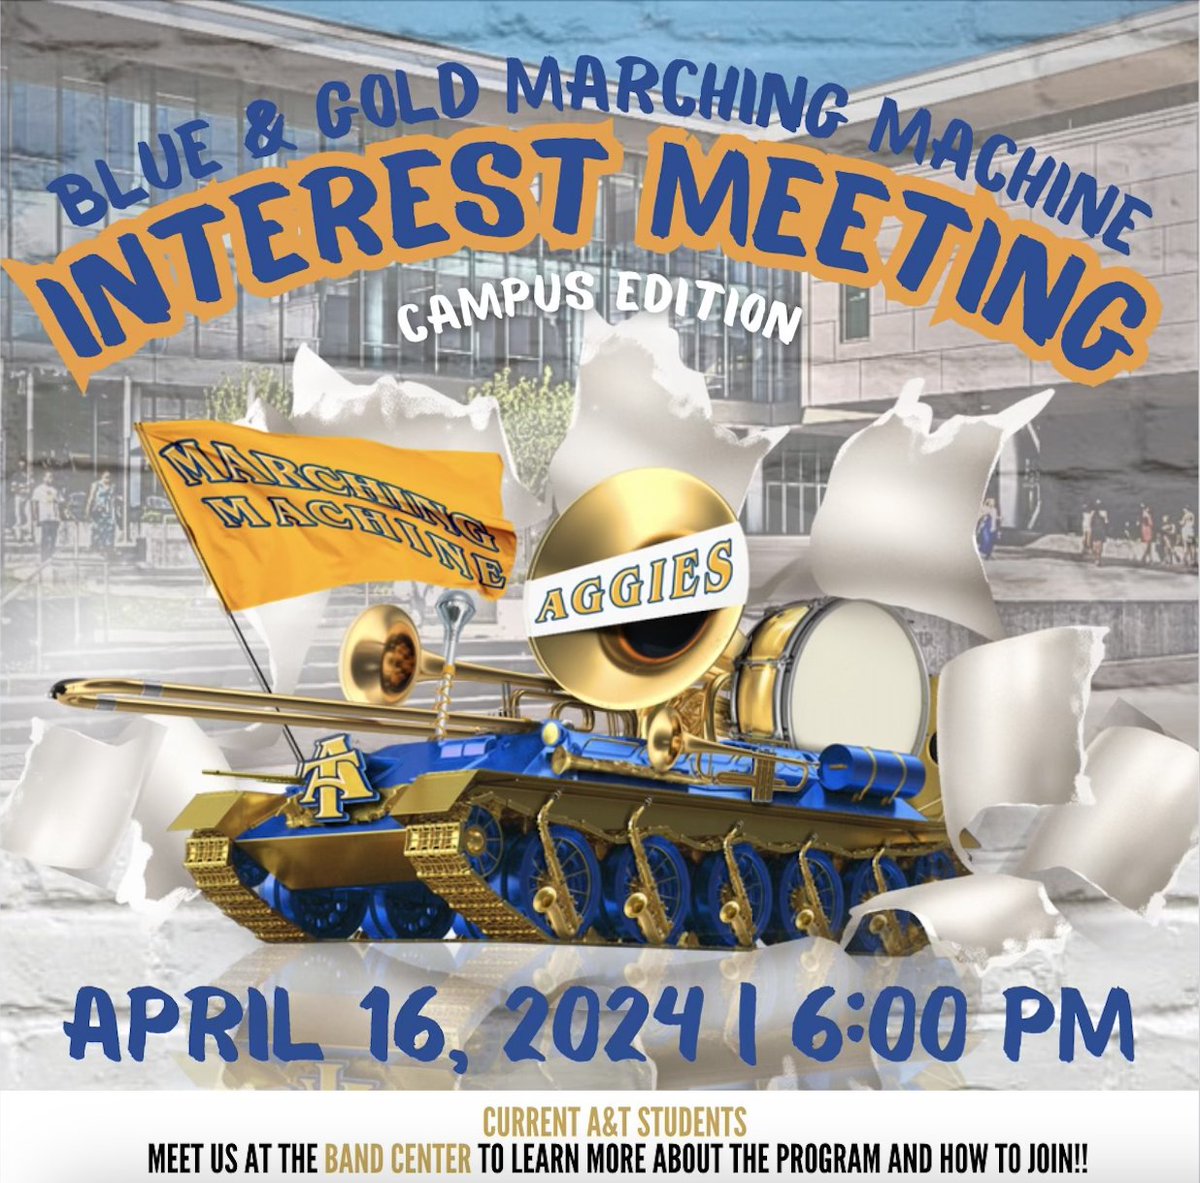 Calling all current A&T students!!! Are you interested in joining the best band in the nation-the Blue & Gold Marching Machine? Come to the band center April 16 to find out how you can be a part. Don't miss out! Click the link to register! shorturl.at/nyHR4